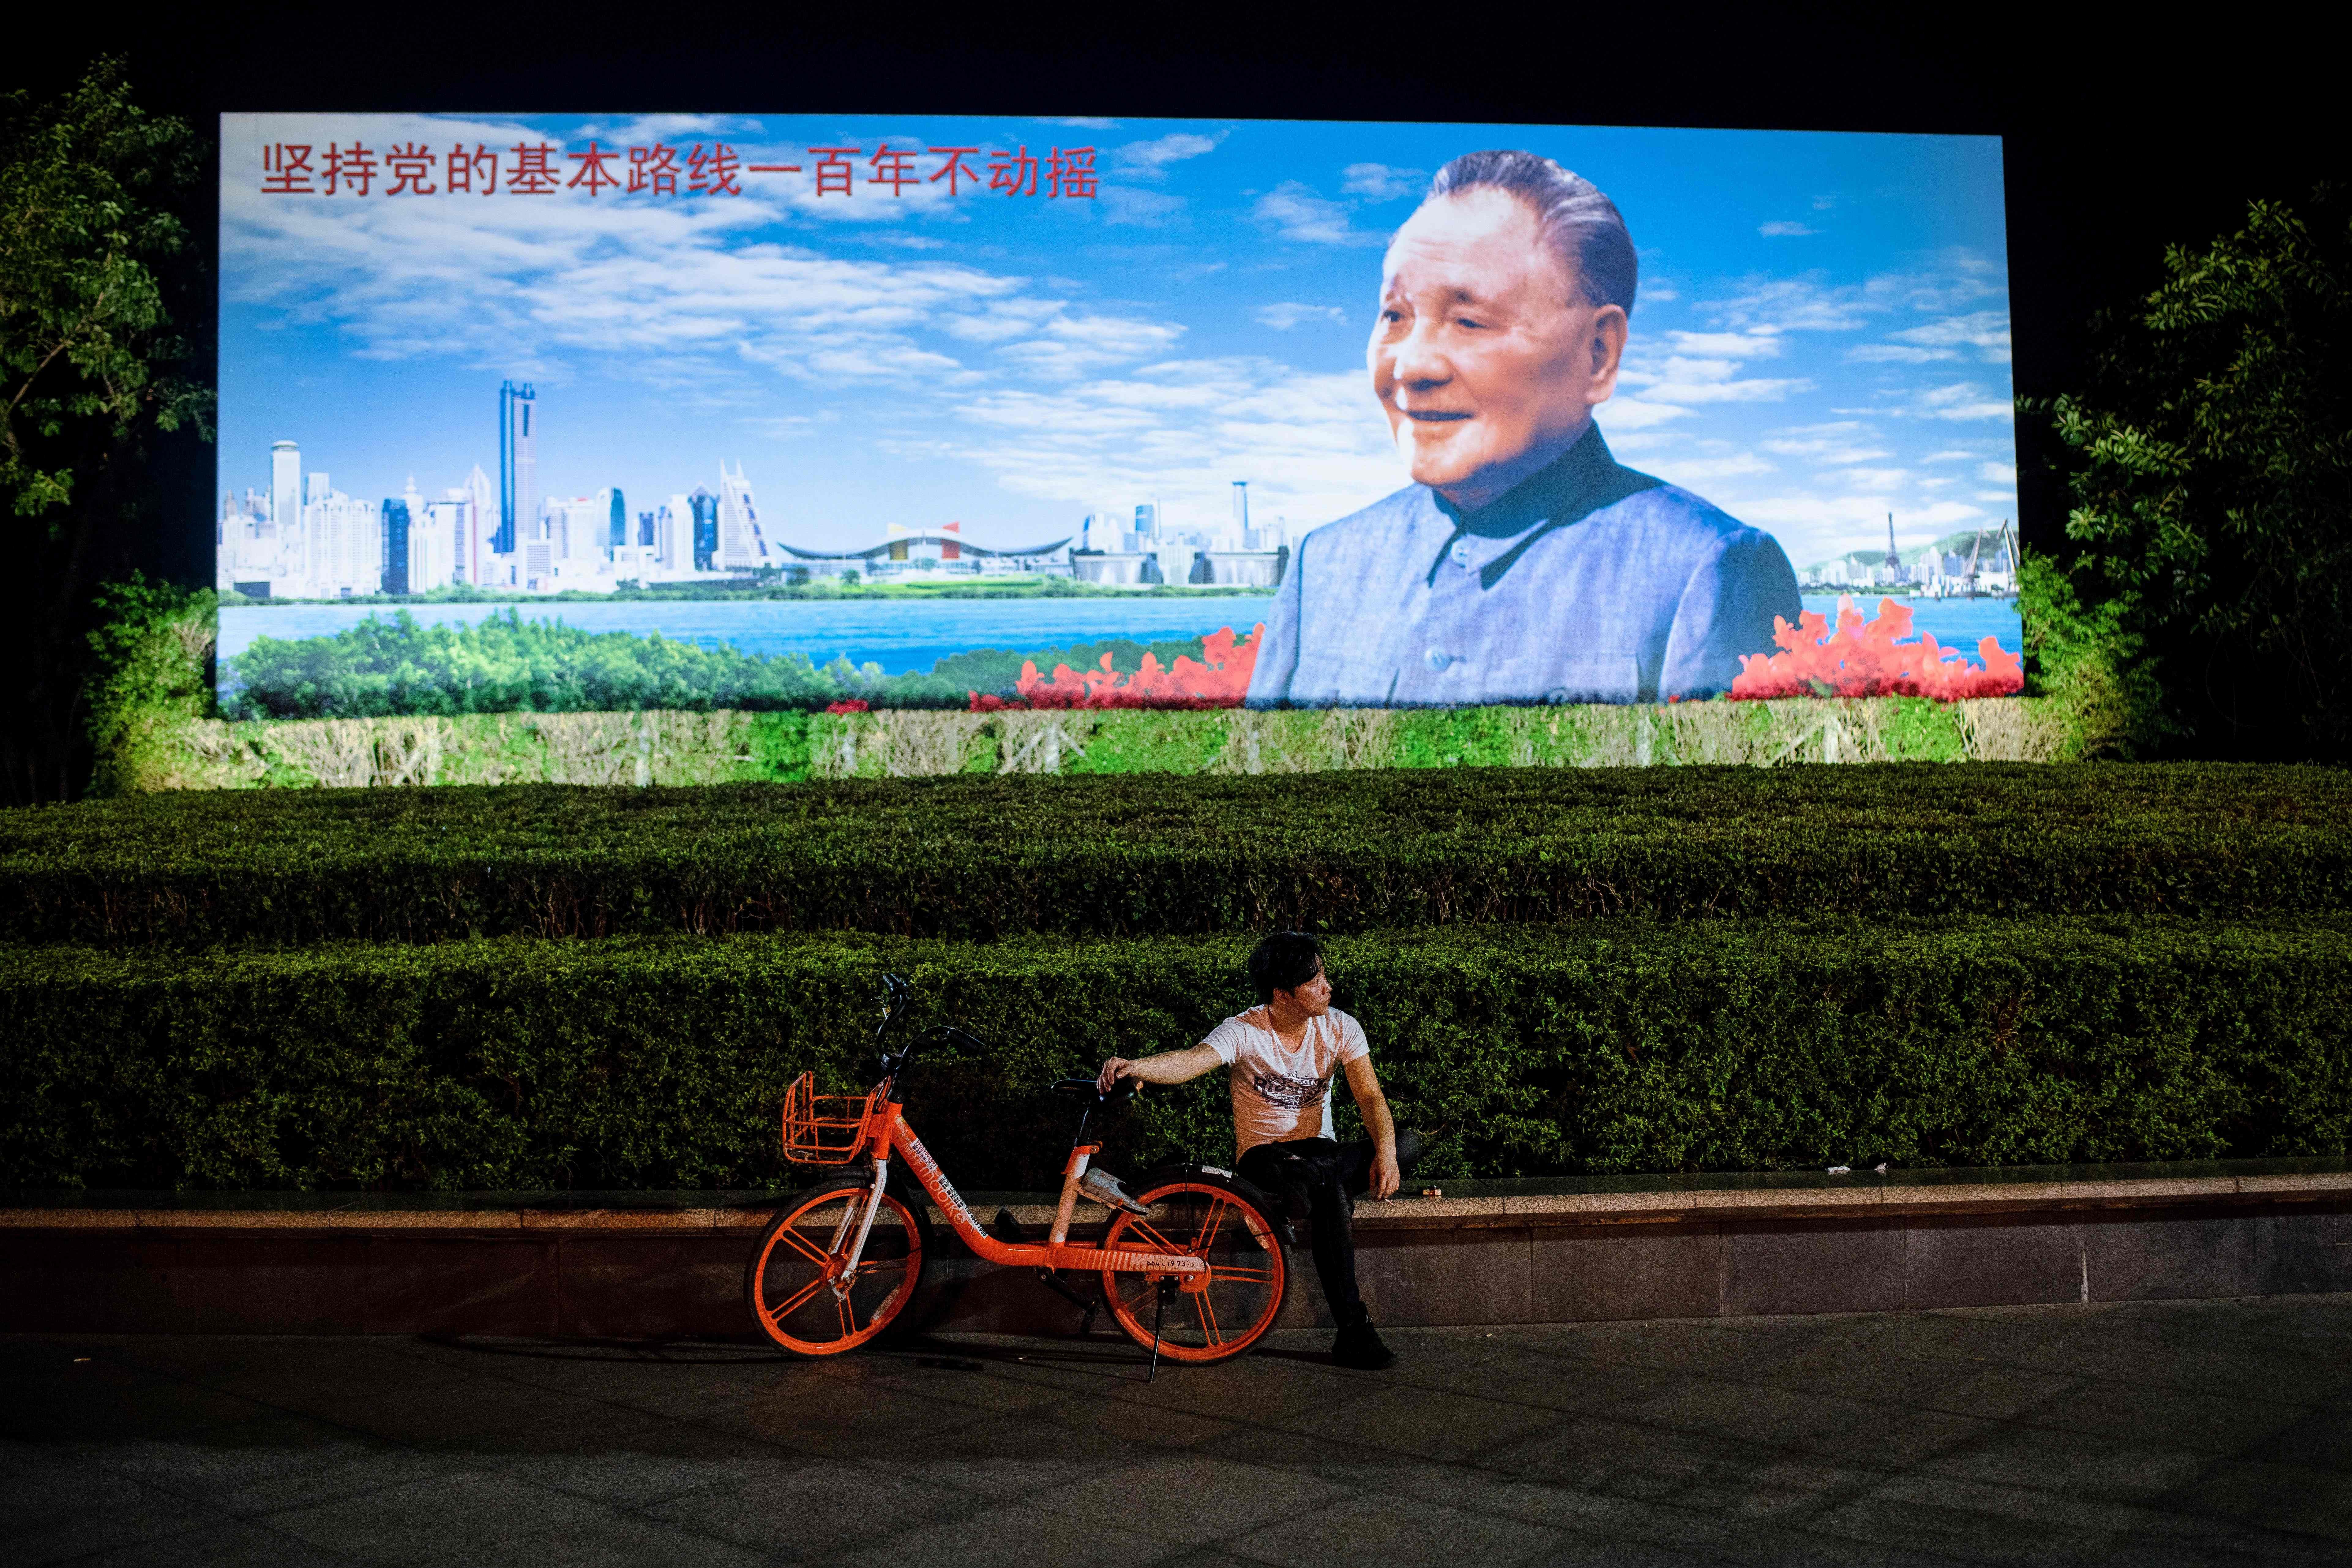 A Shenzhen resident rests in front of a poster of Deng Xiaoping in November. In December, China marked the 40th anniversary of reform and opening up, launched by Deng in December 1978, which has catapulted the country to the status of the world’s second-largest economy. Photo: AFP